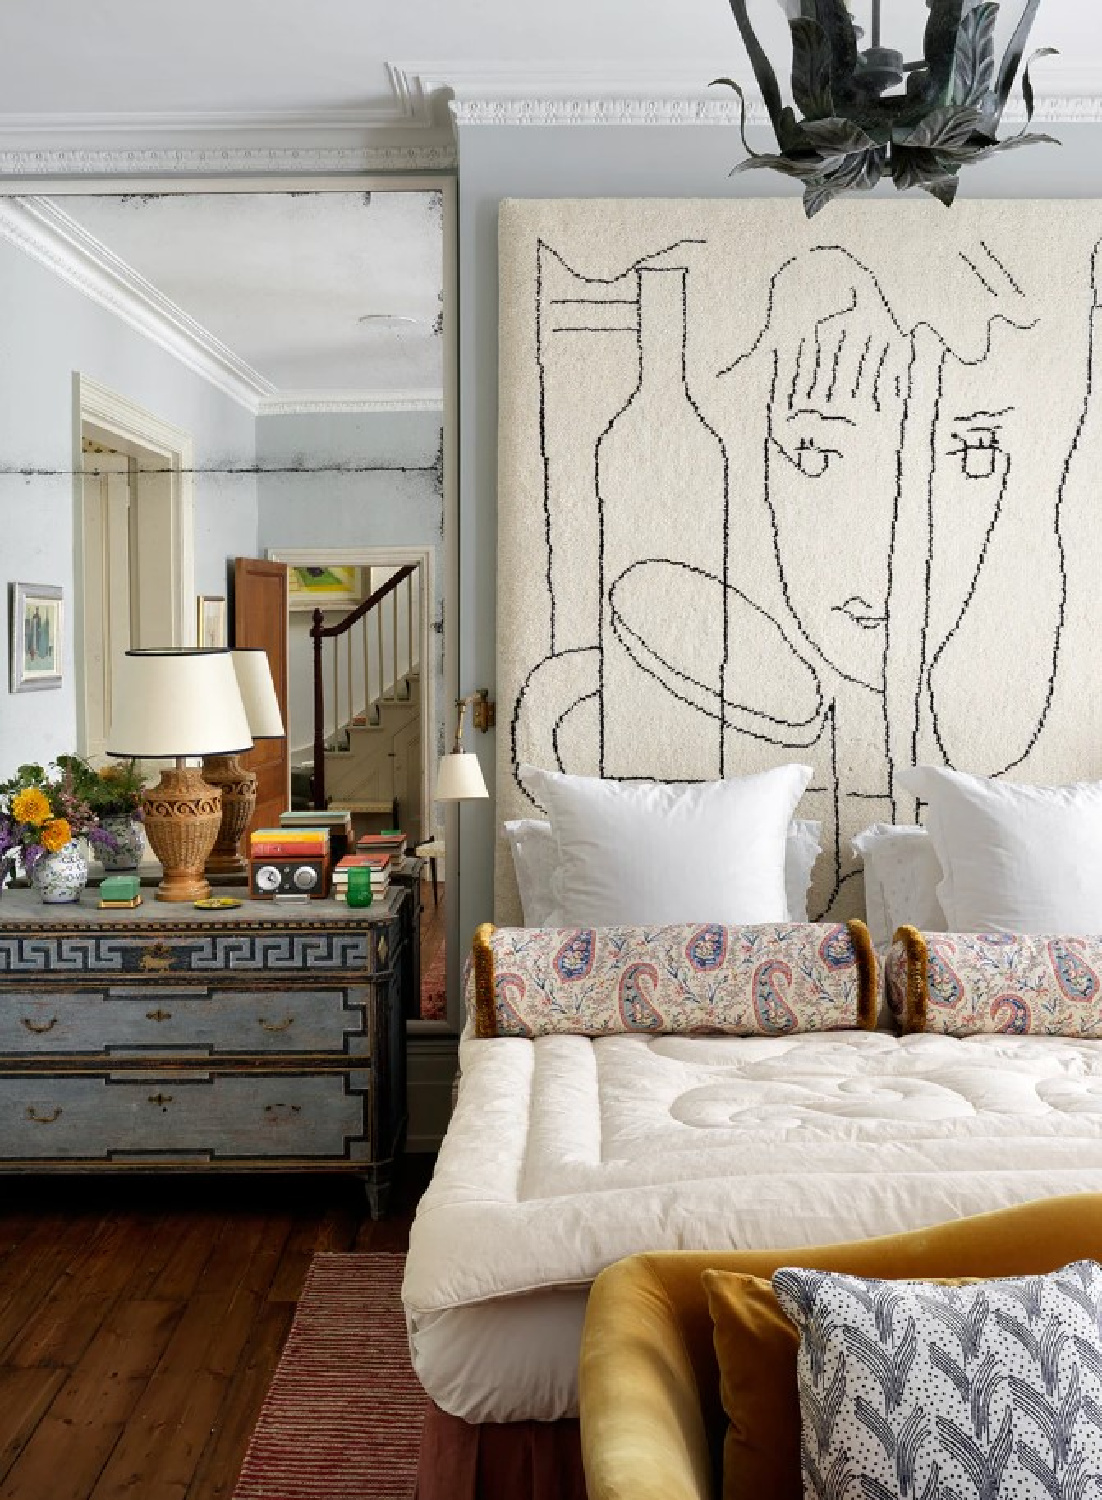 Whimsical bedroom designed by Beata Heuman - photo by Simon Brown.